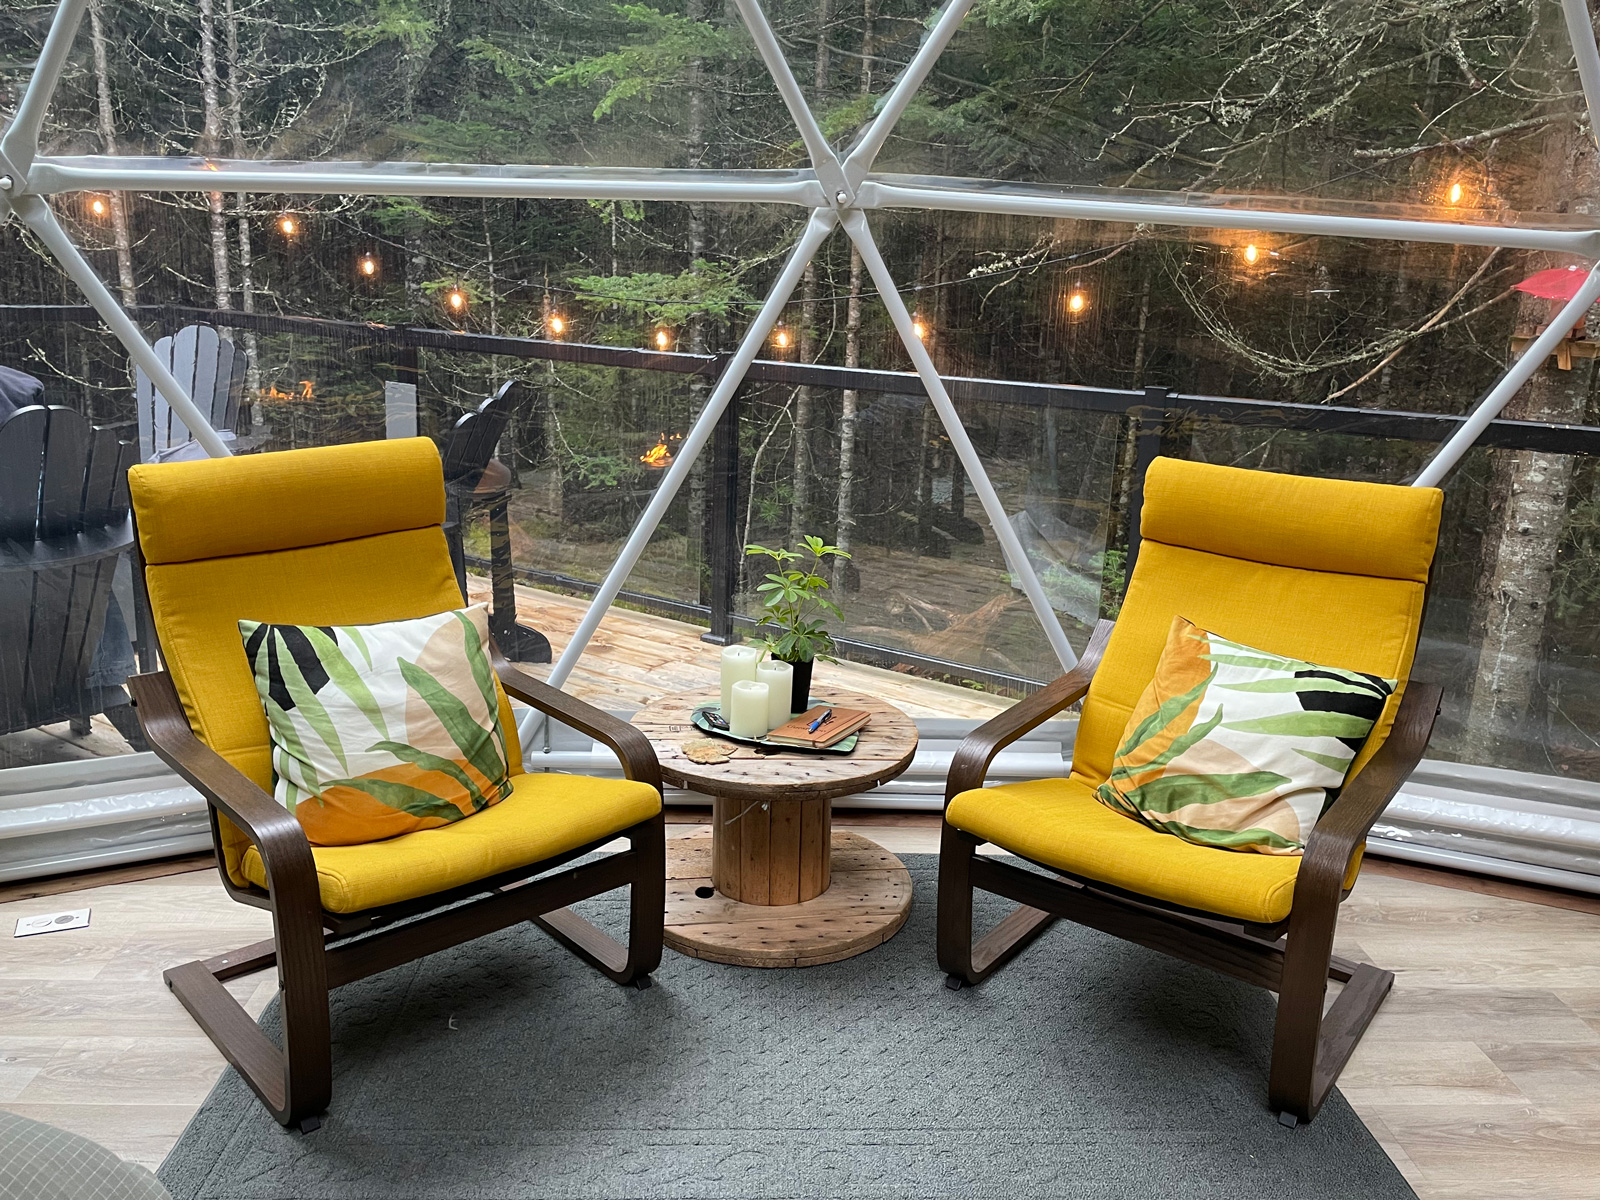 Mossy Log Dome Sitting Area